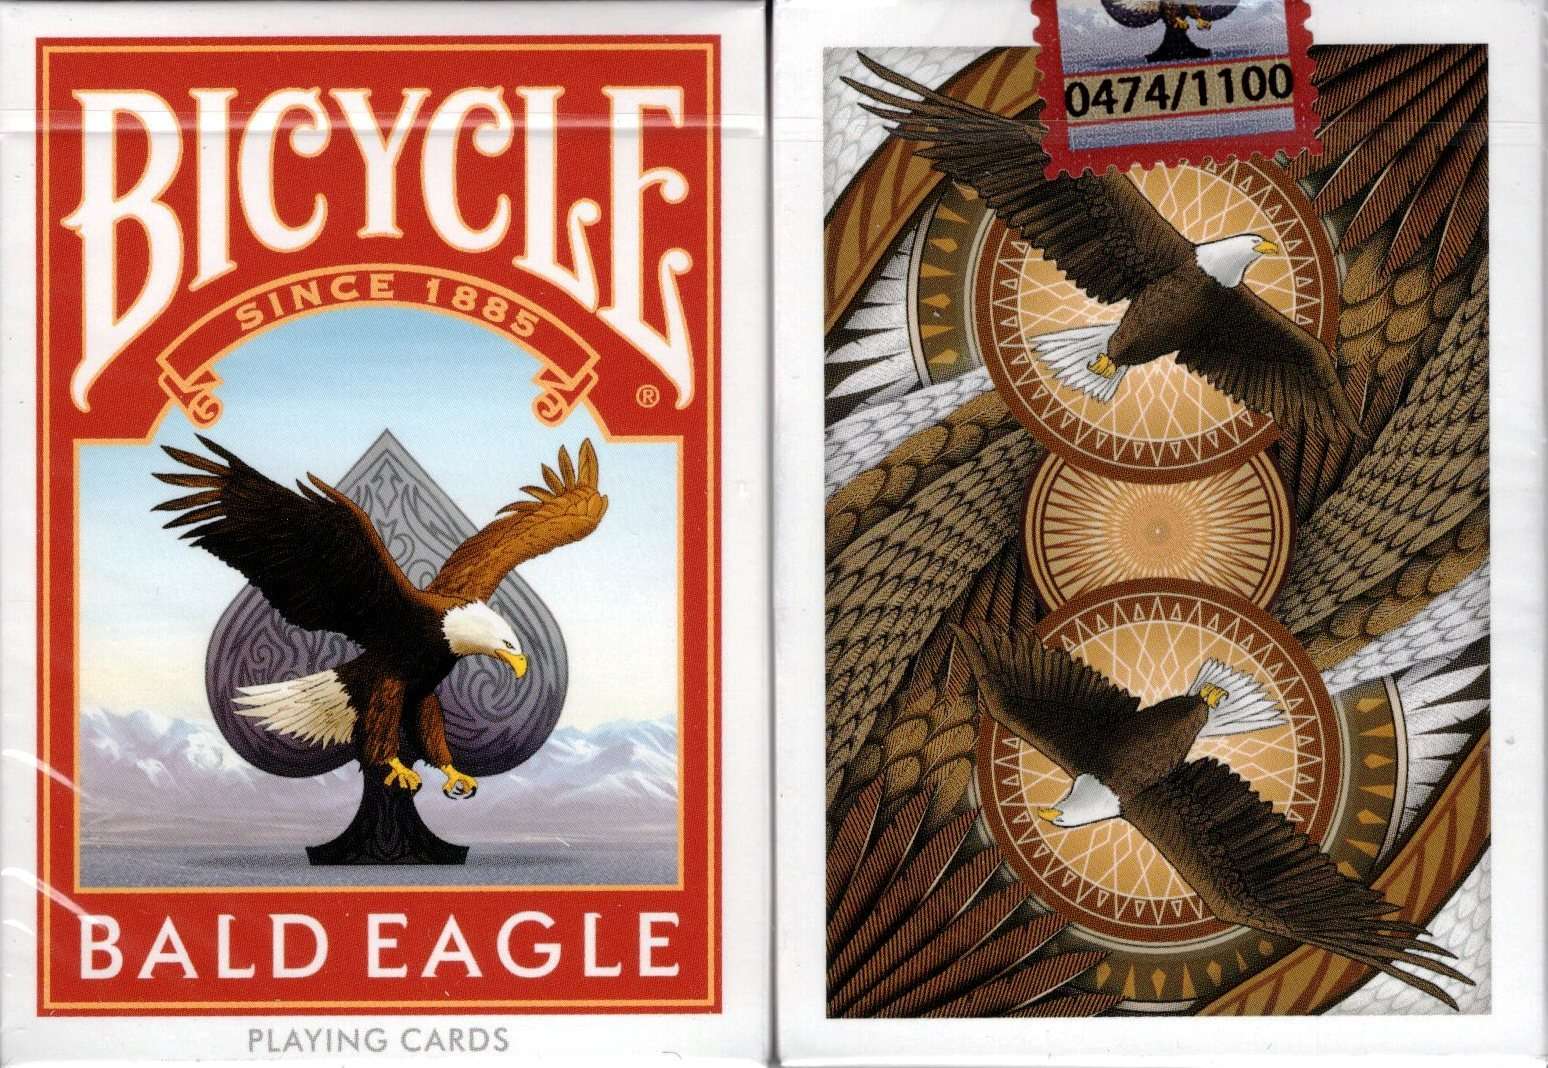 PlayingCardDecks.com-Bald Eagle Bicycle Playing Cards with Numbered Seal